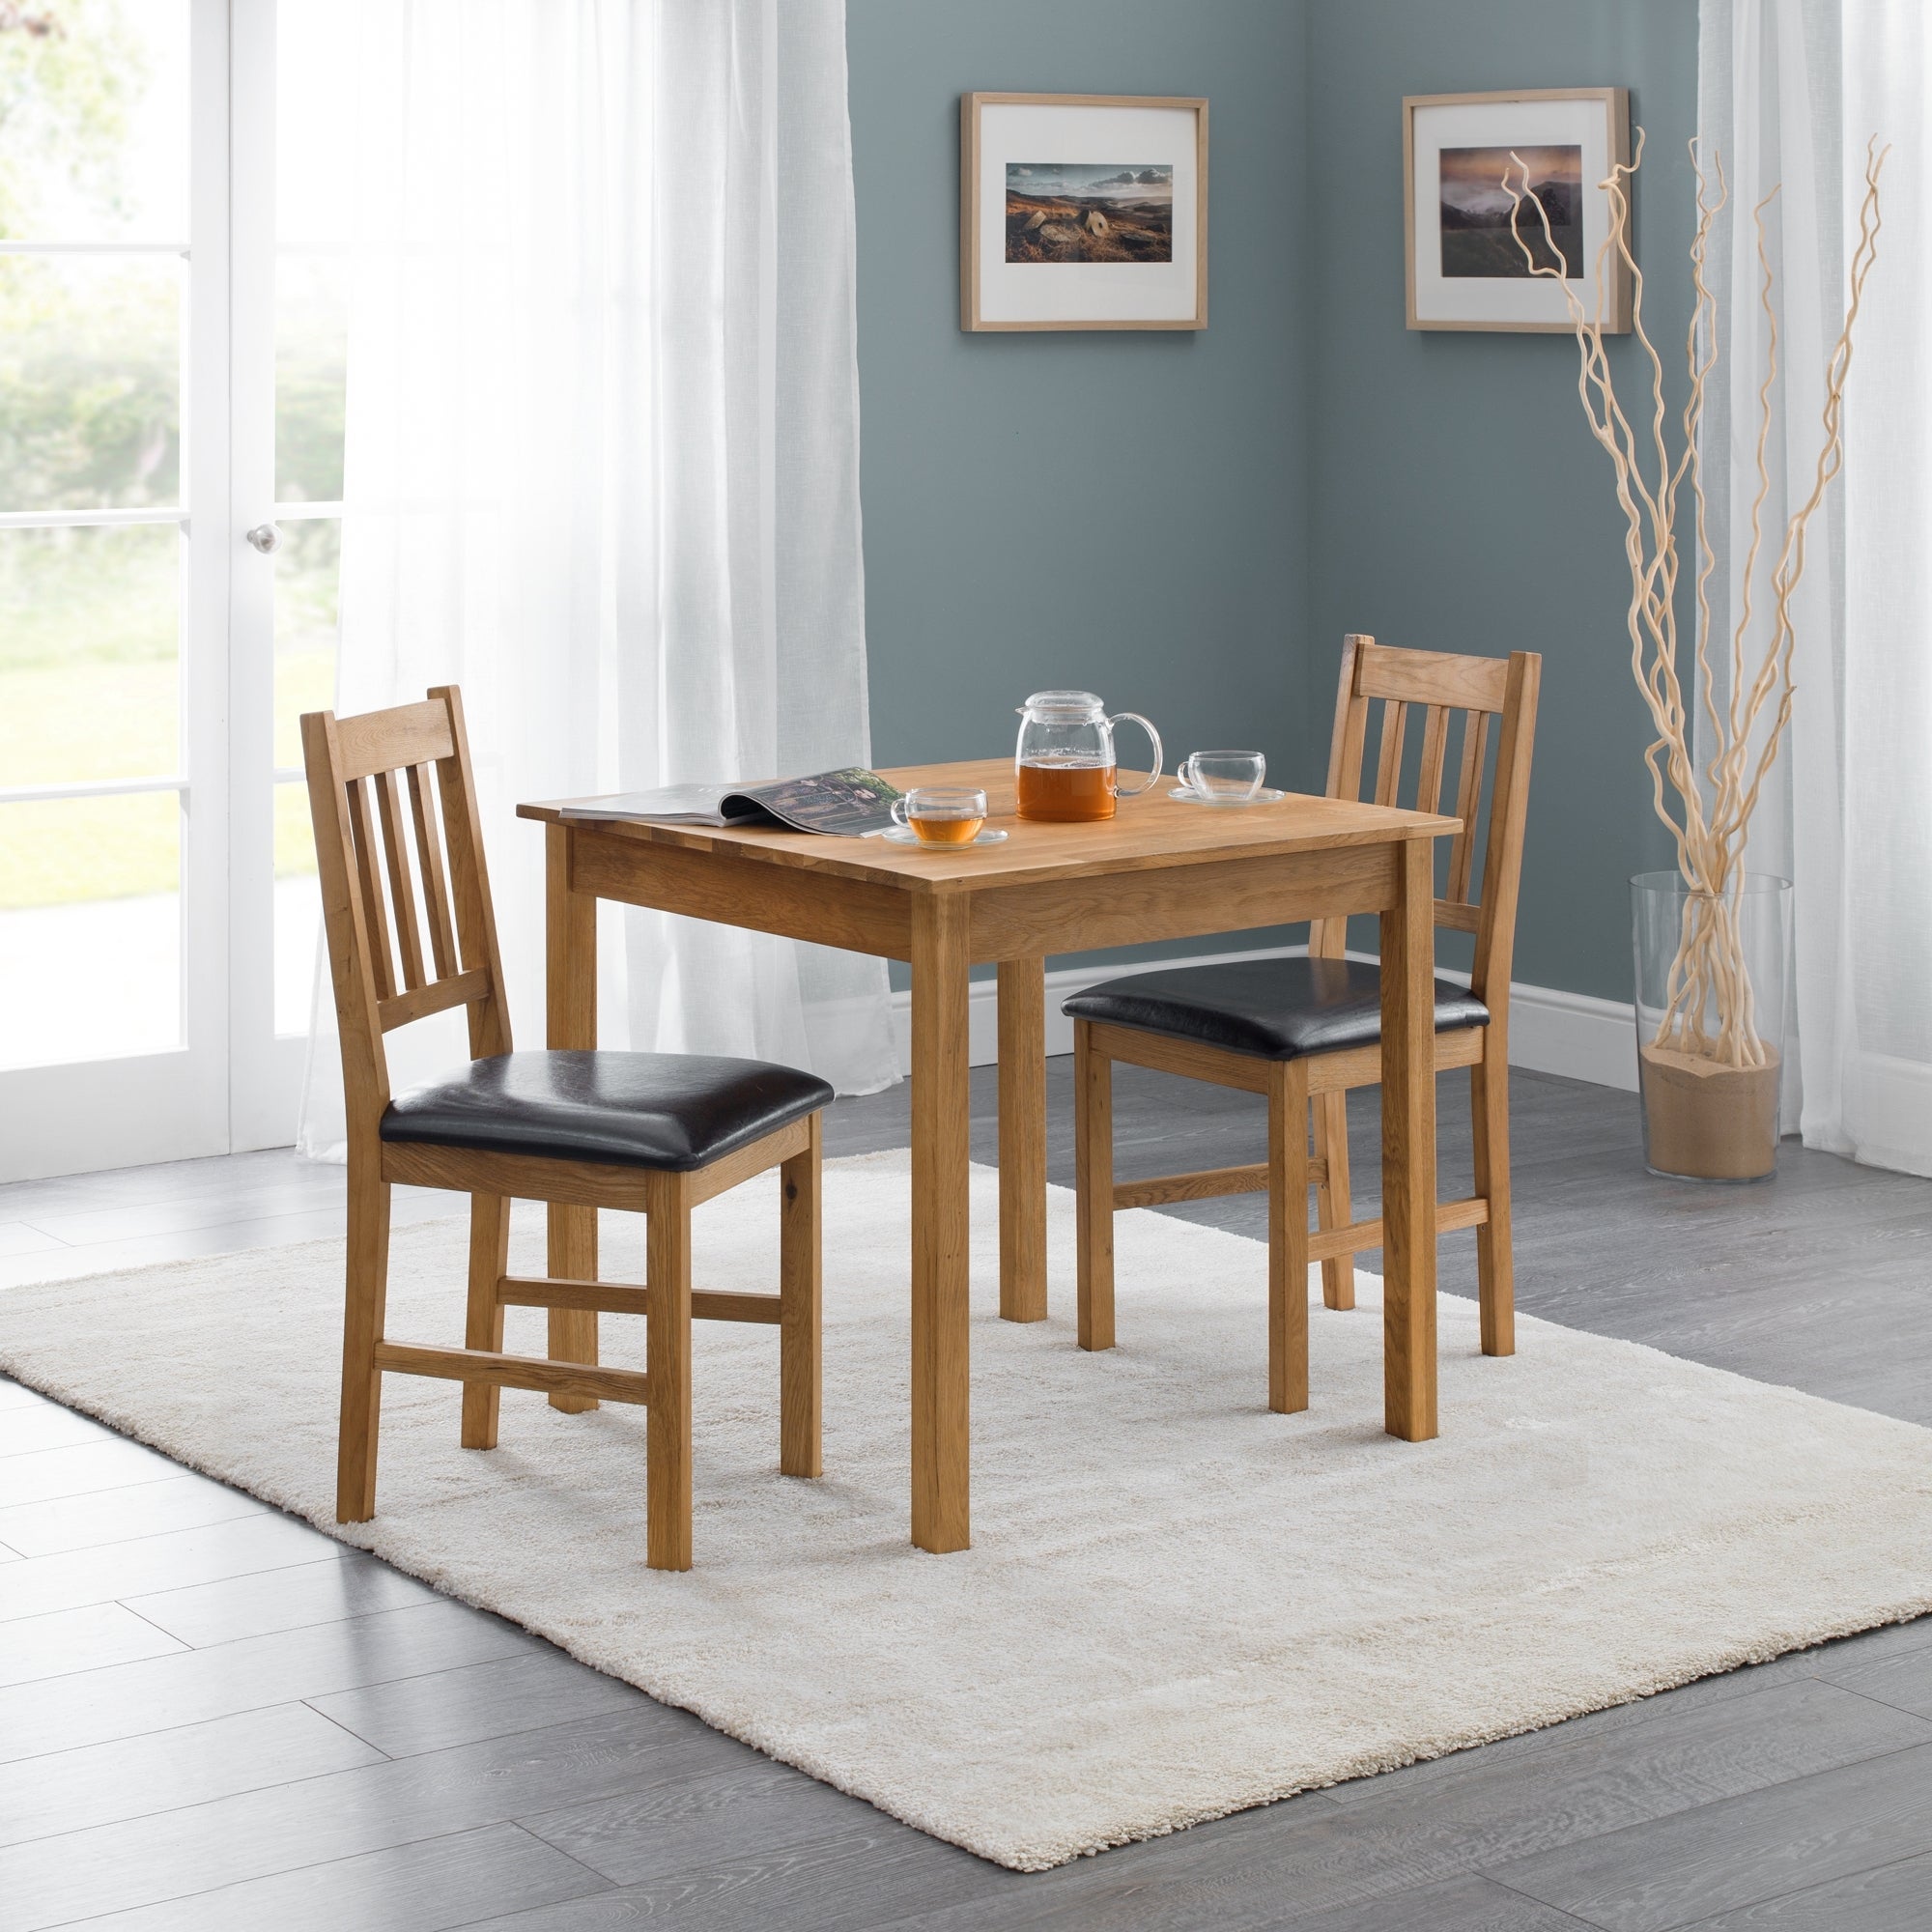 Coxmoor Square Dining Table with 2 Chairs